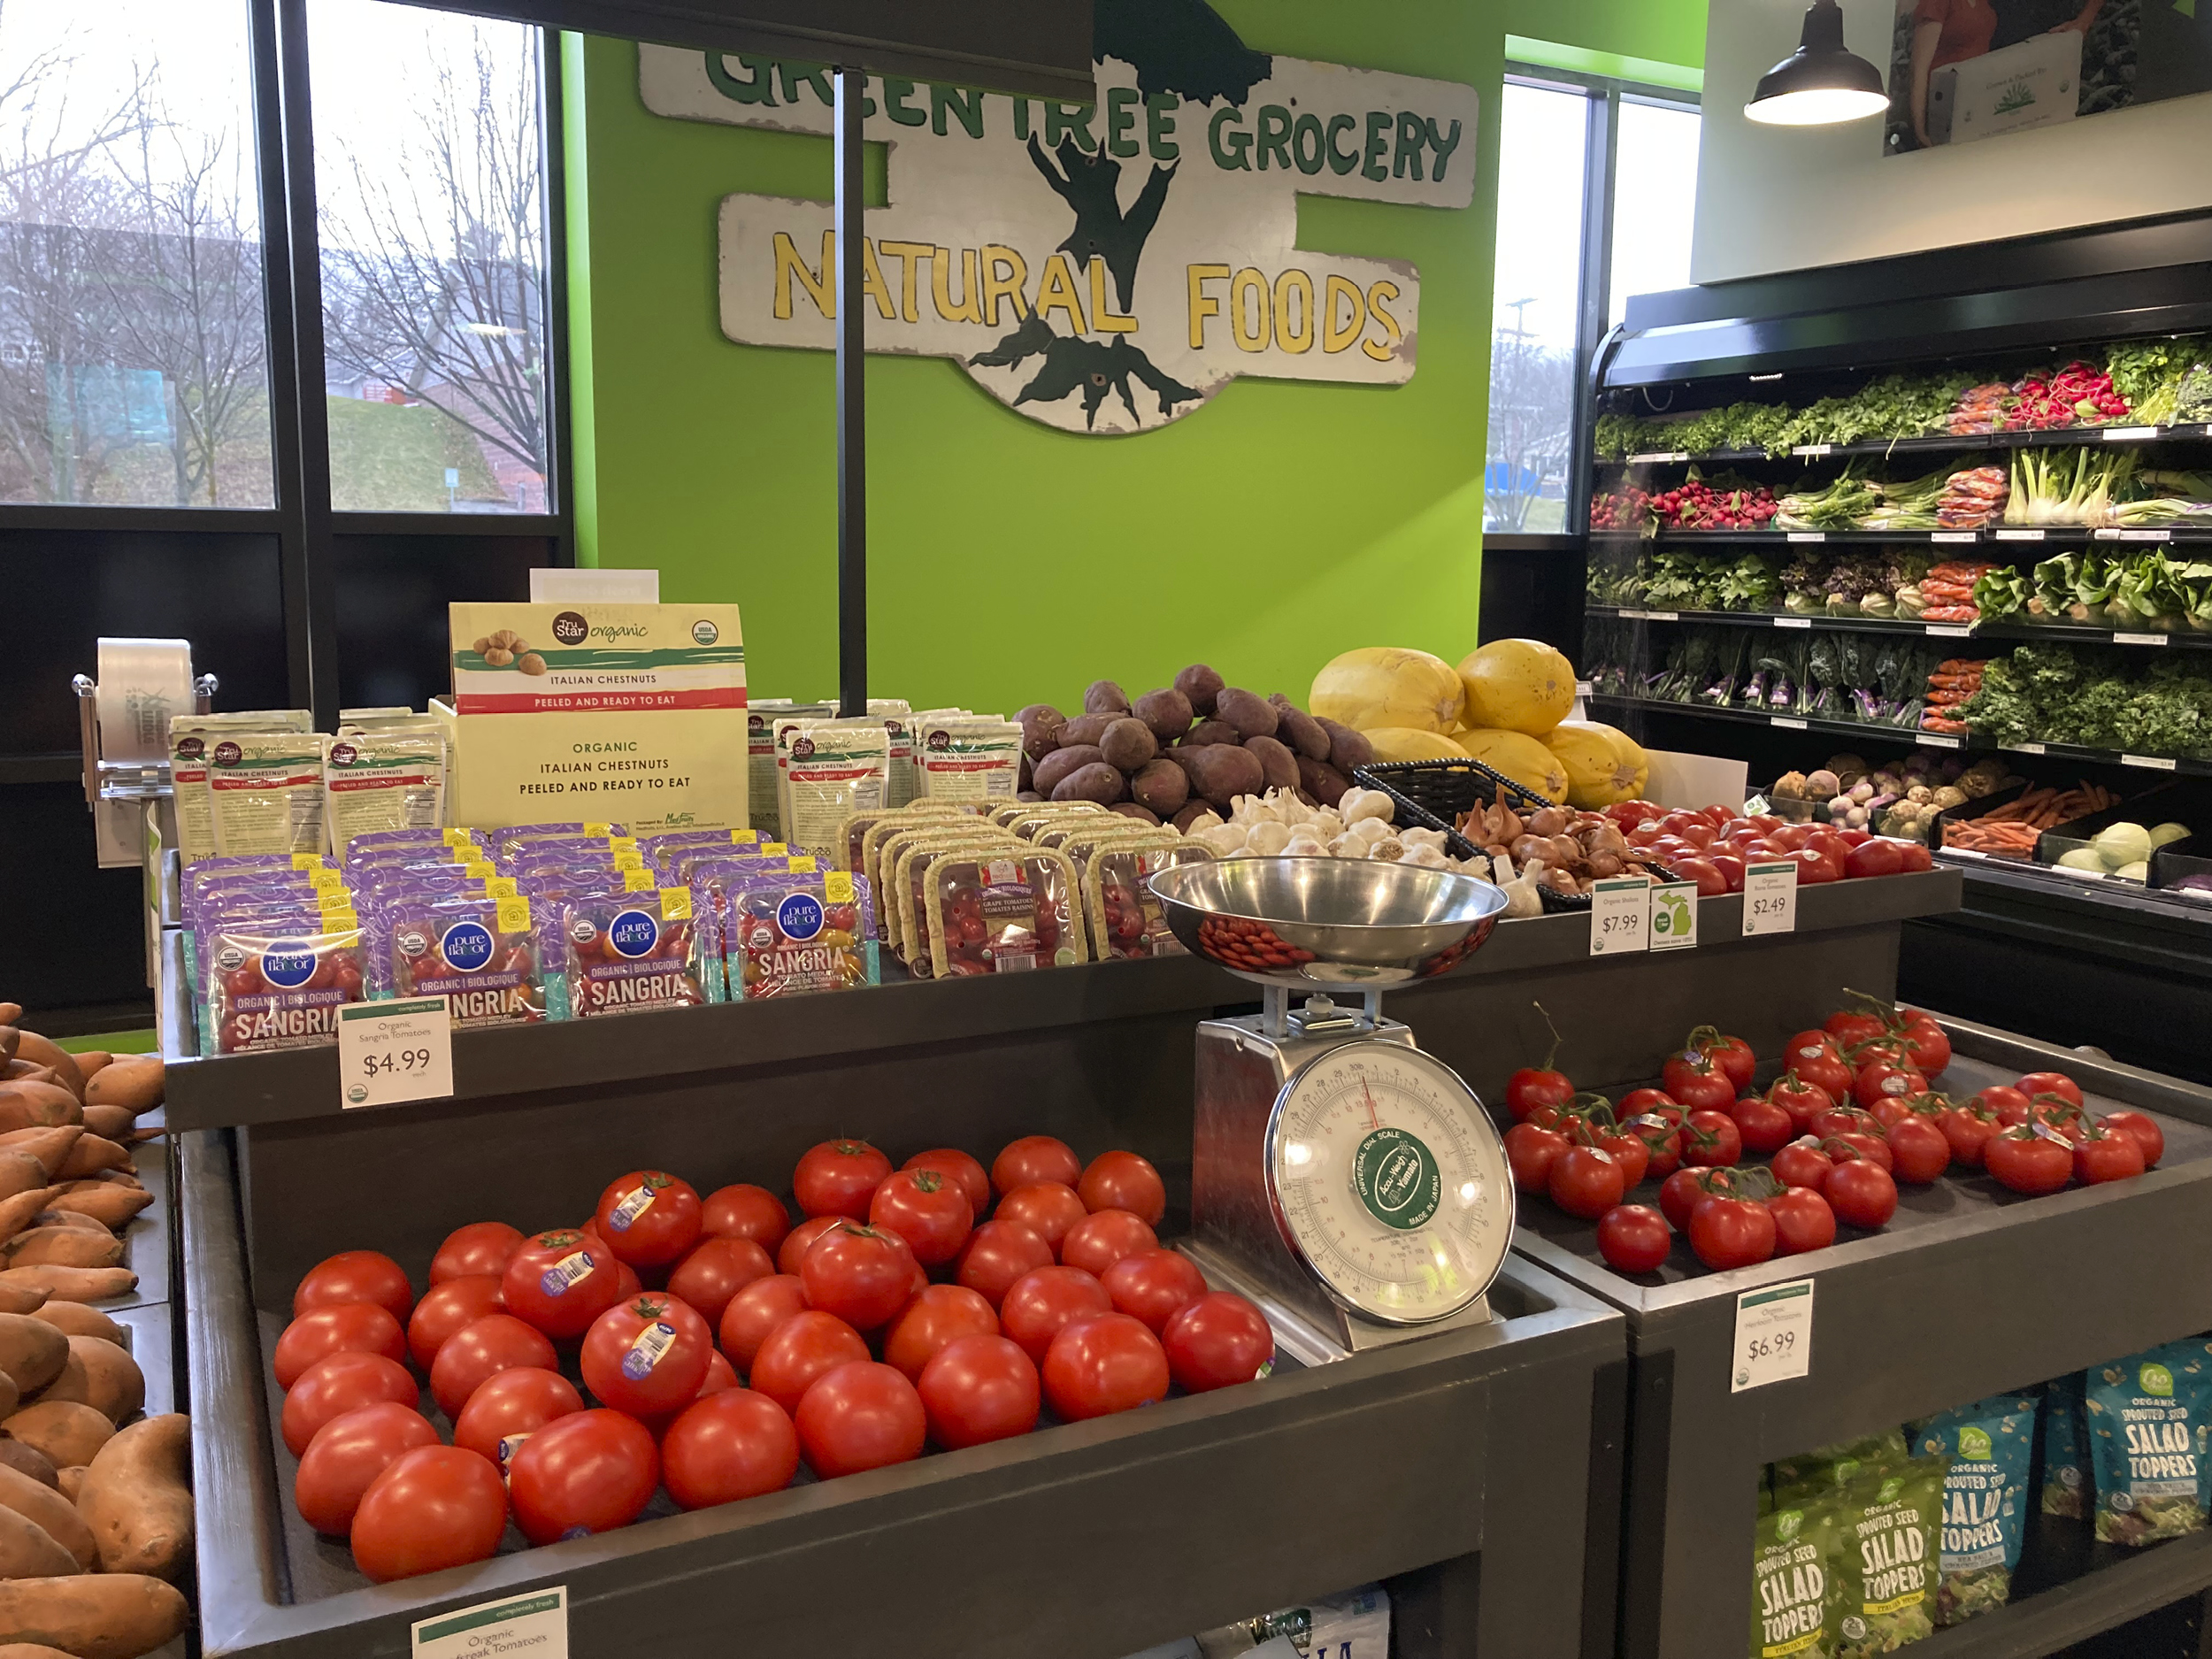 Greentree produce section